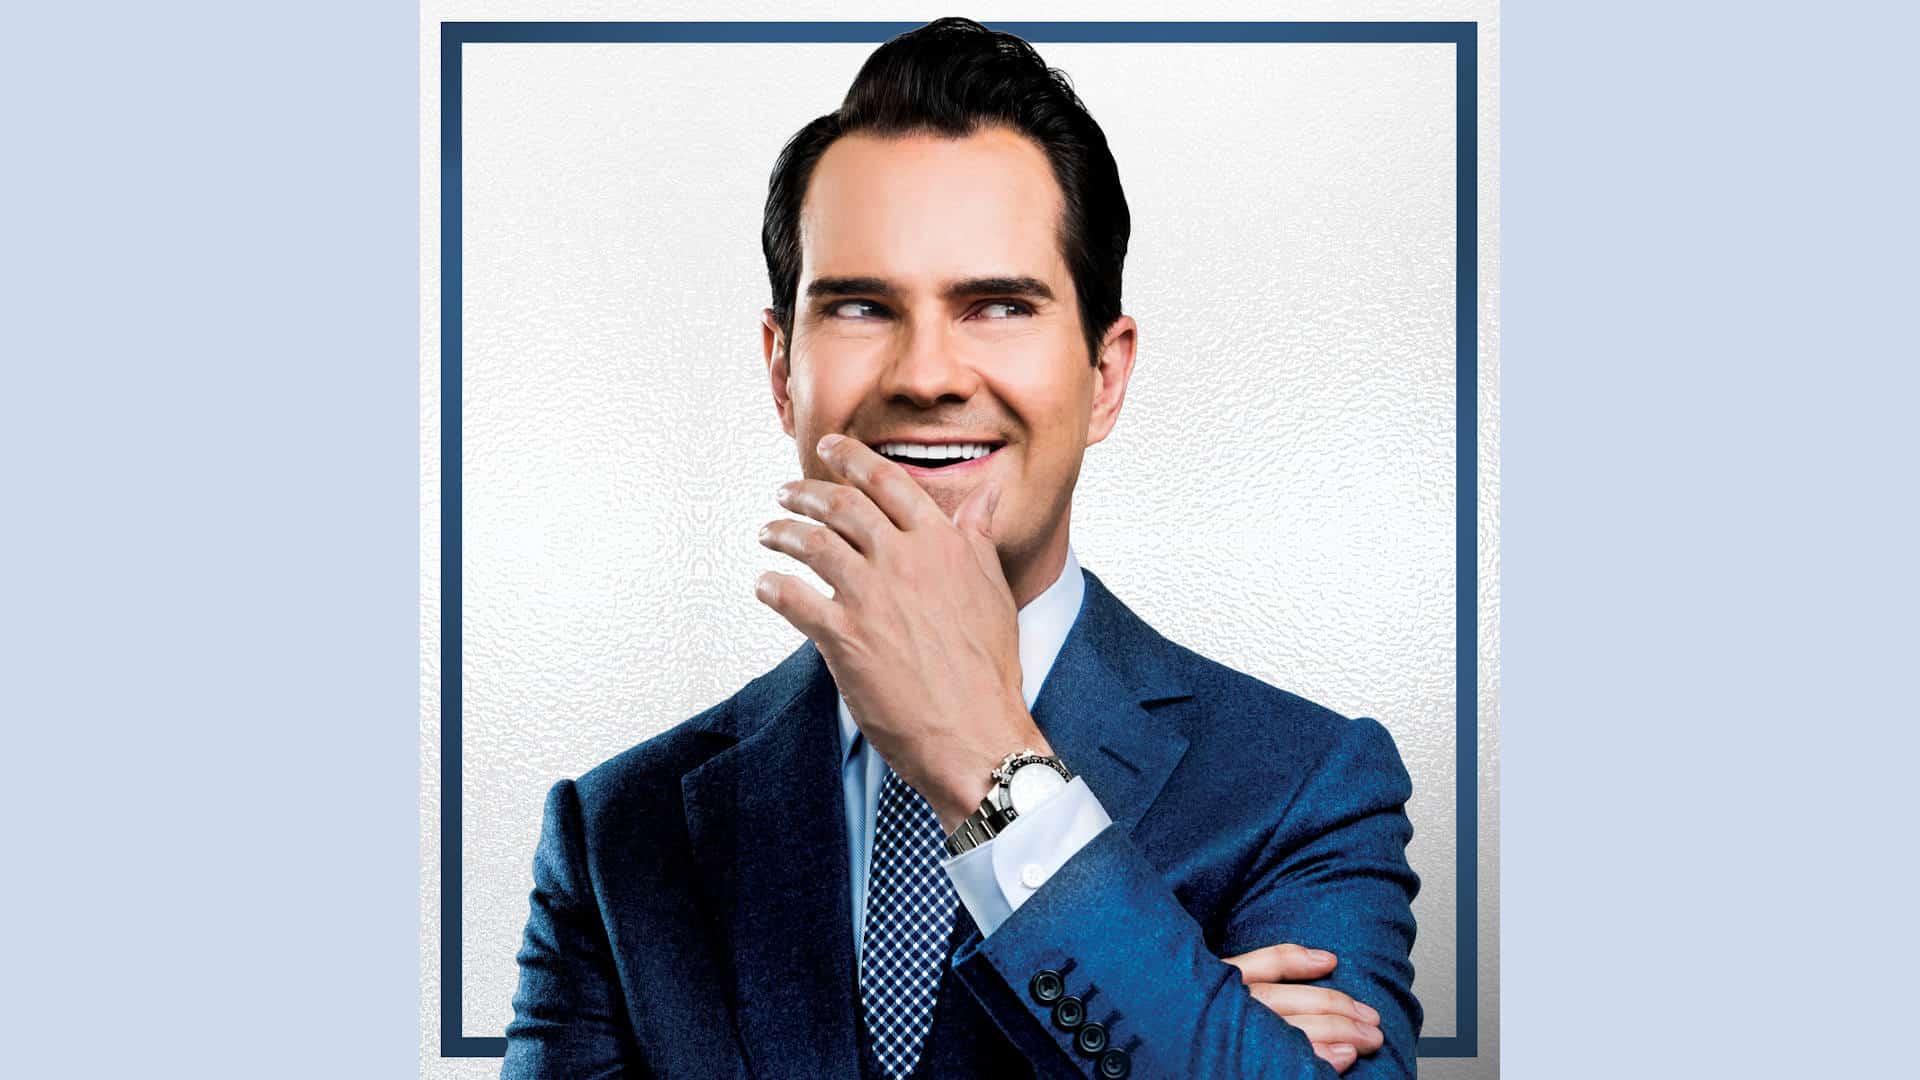 Jimmy Carr portrait for 'Terribly Funny' show